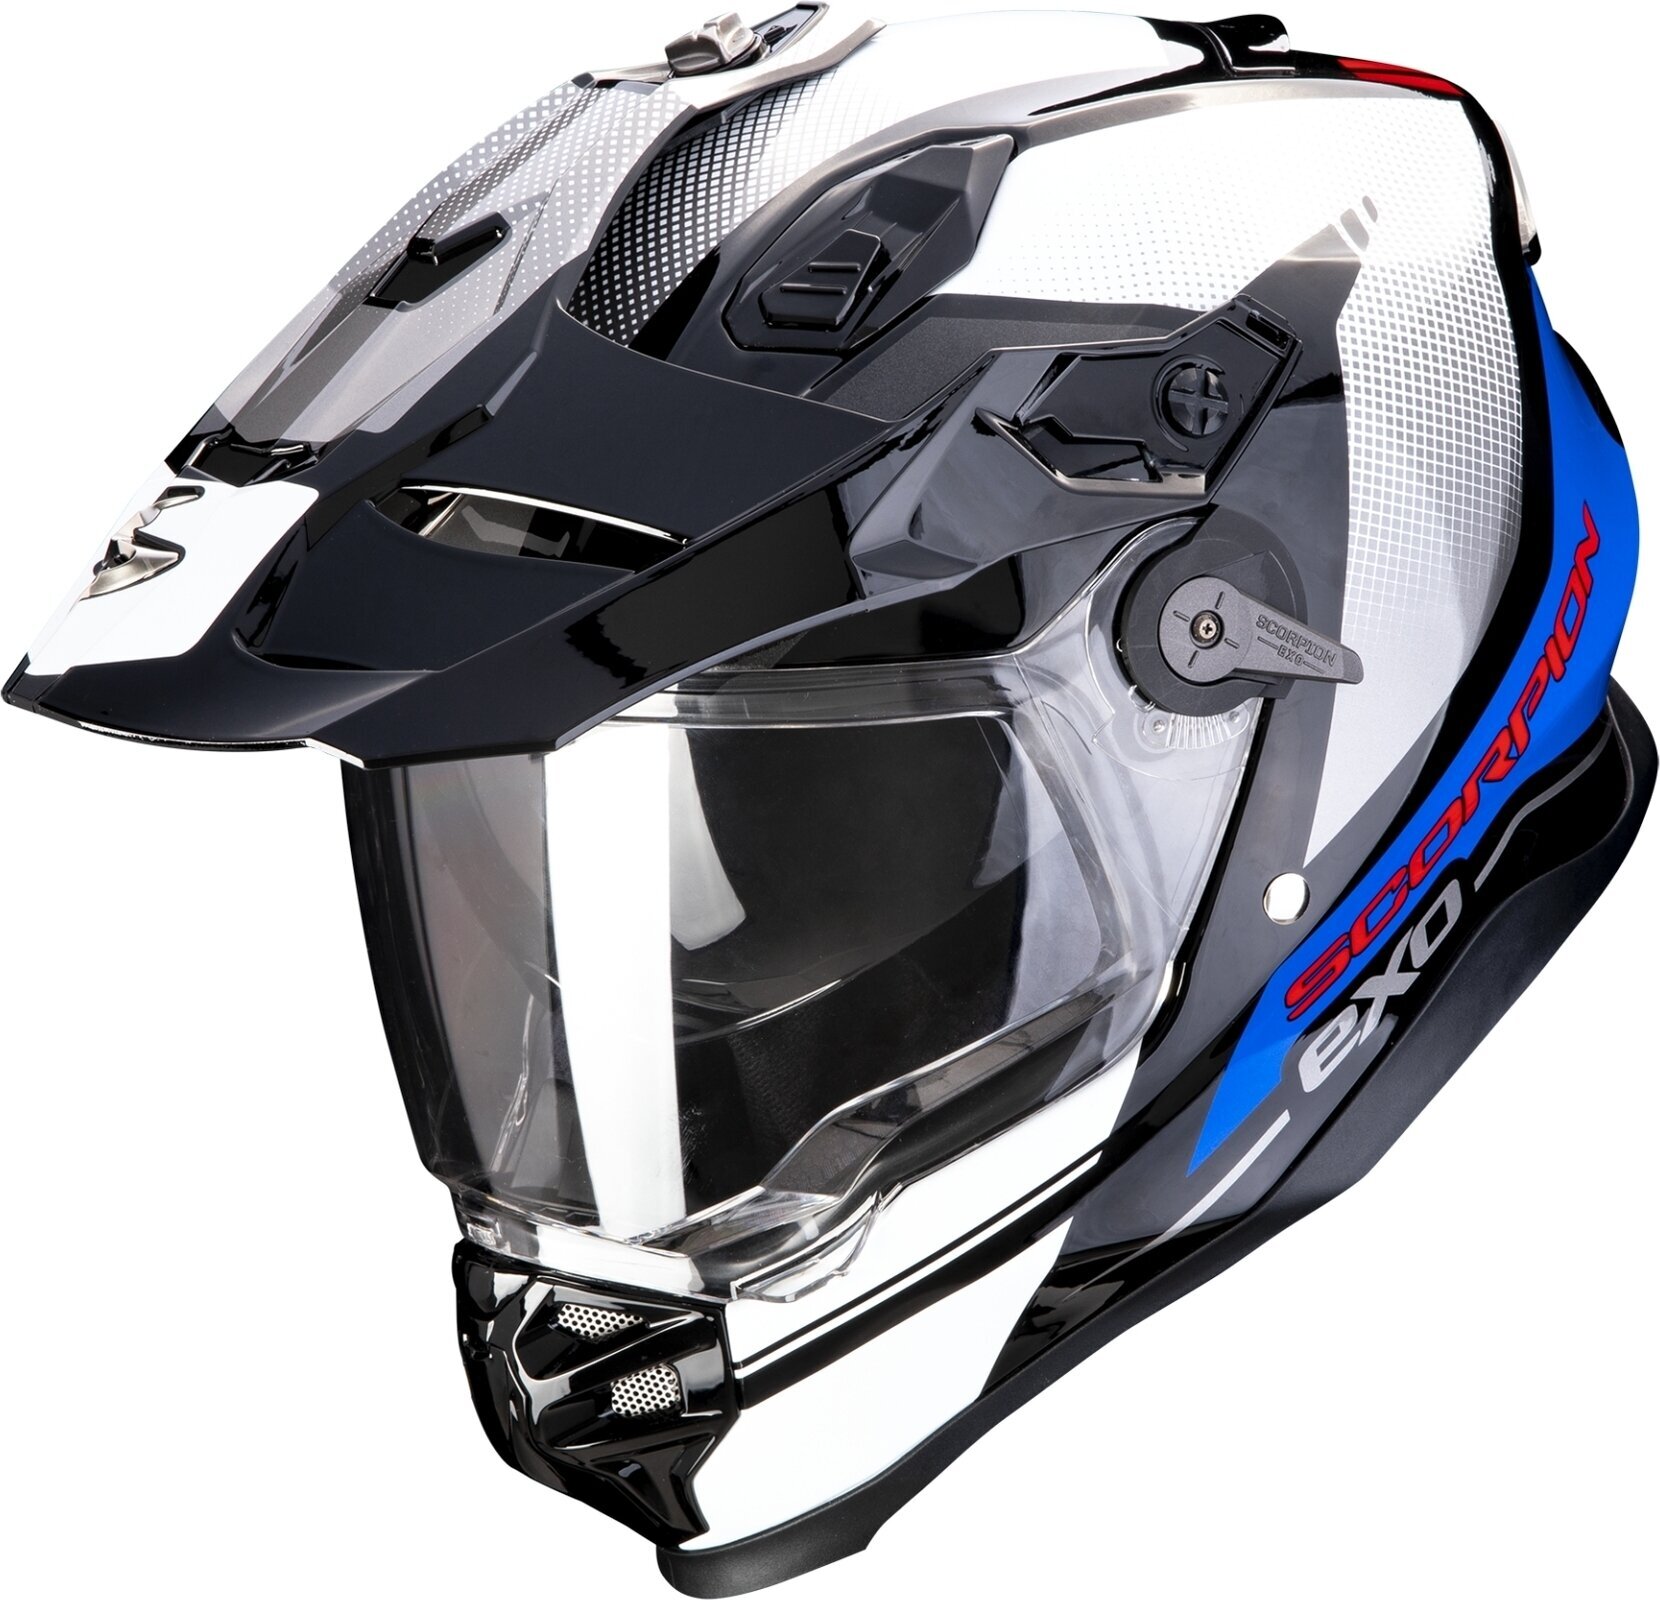 Kask Scorpion ADF-9000 AIR TRAIL Black/Blue/White S Kask